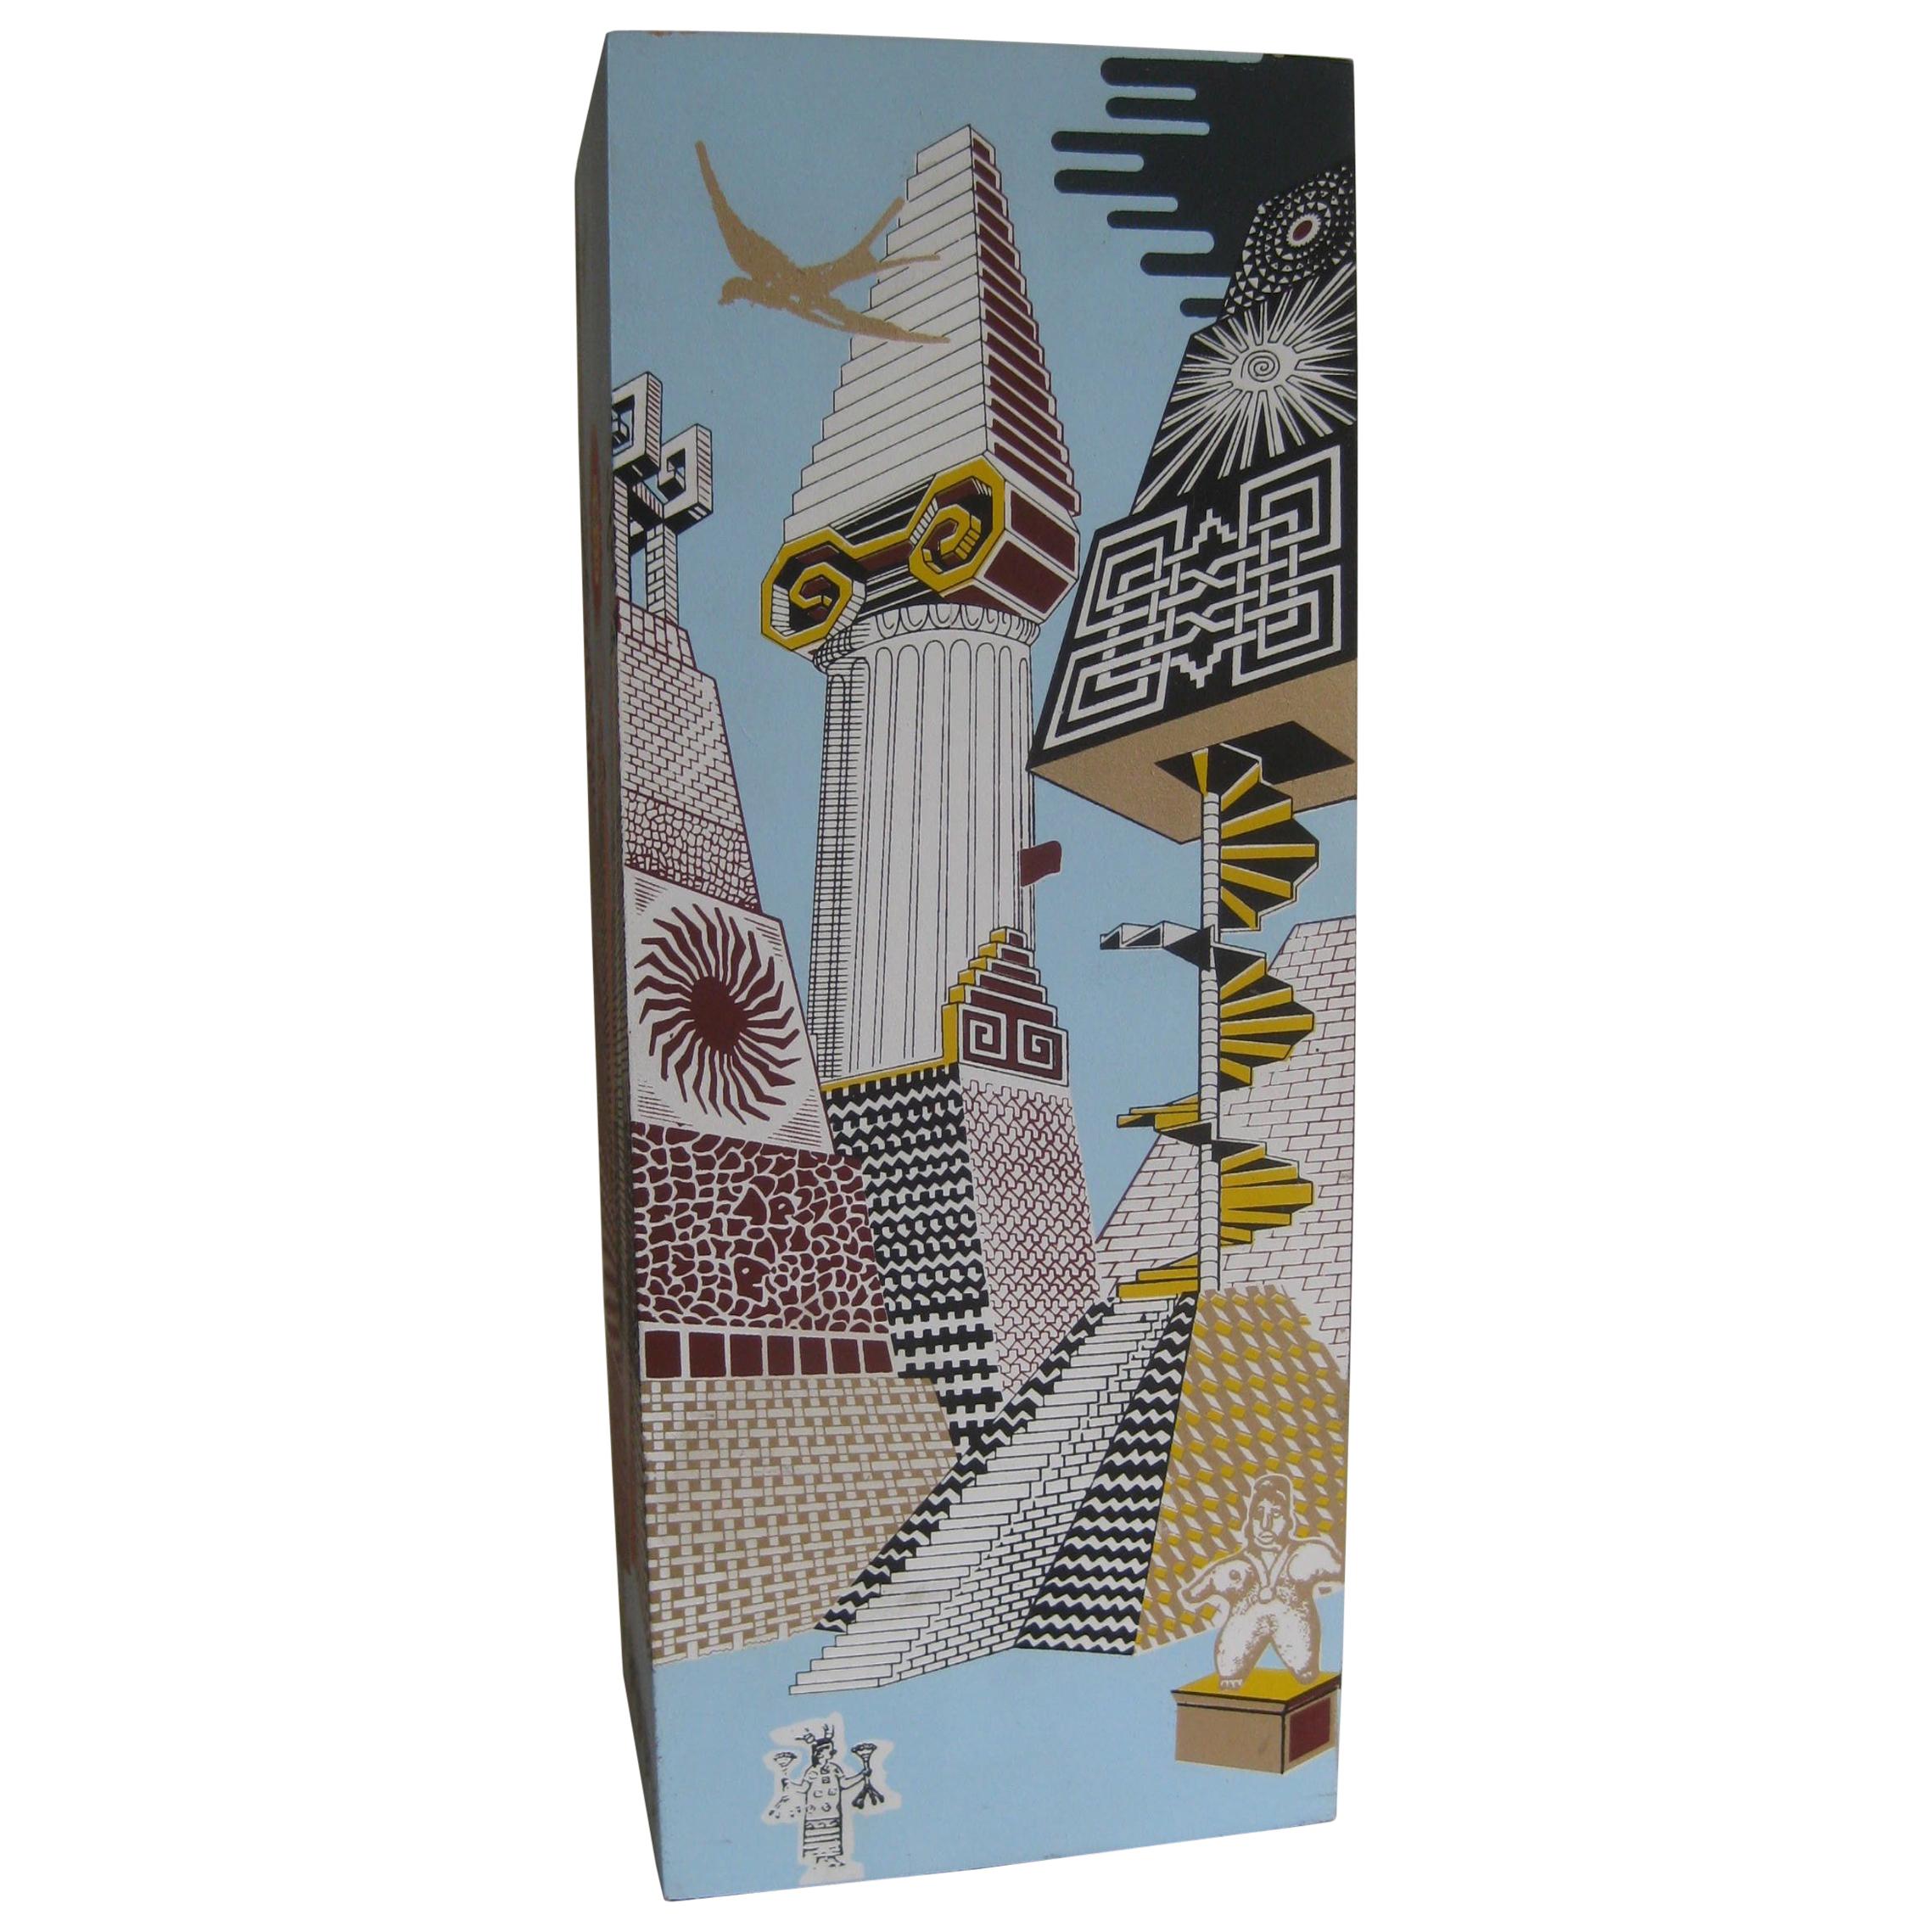 2007 Pedro Friedberg Art Mexican Modernist Silk Screened Wood Tequila Box  For Sale at 1stDibs